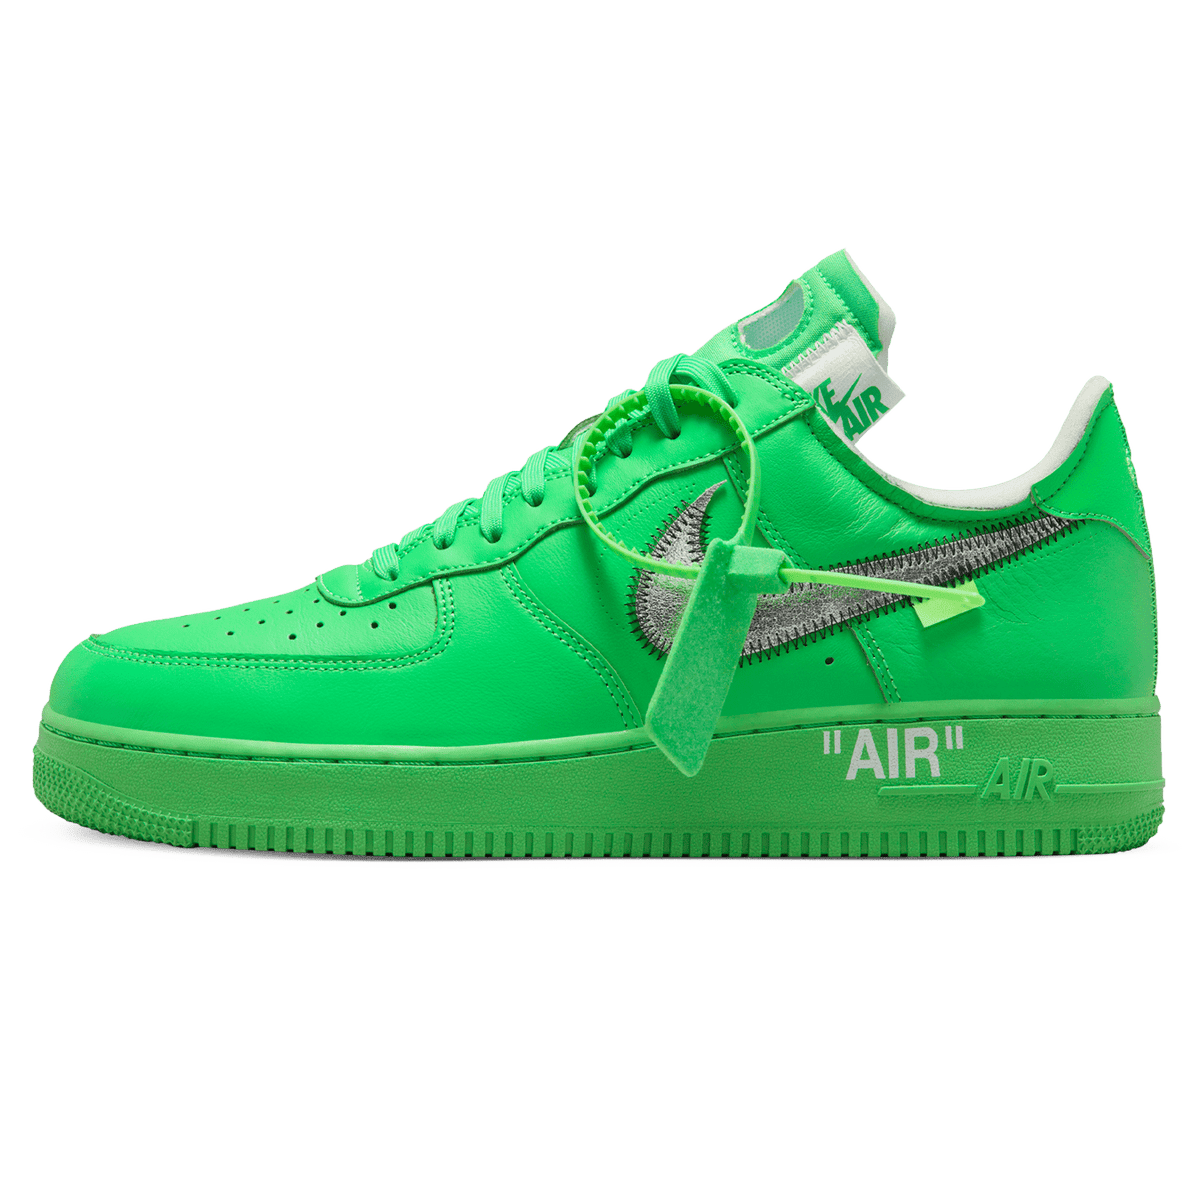 nike air force 1 low off white light green spark DX1419 300 1